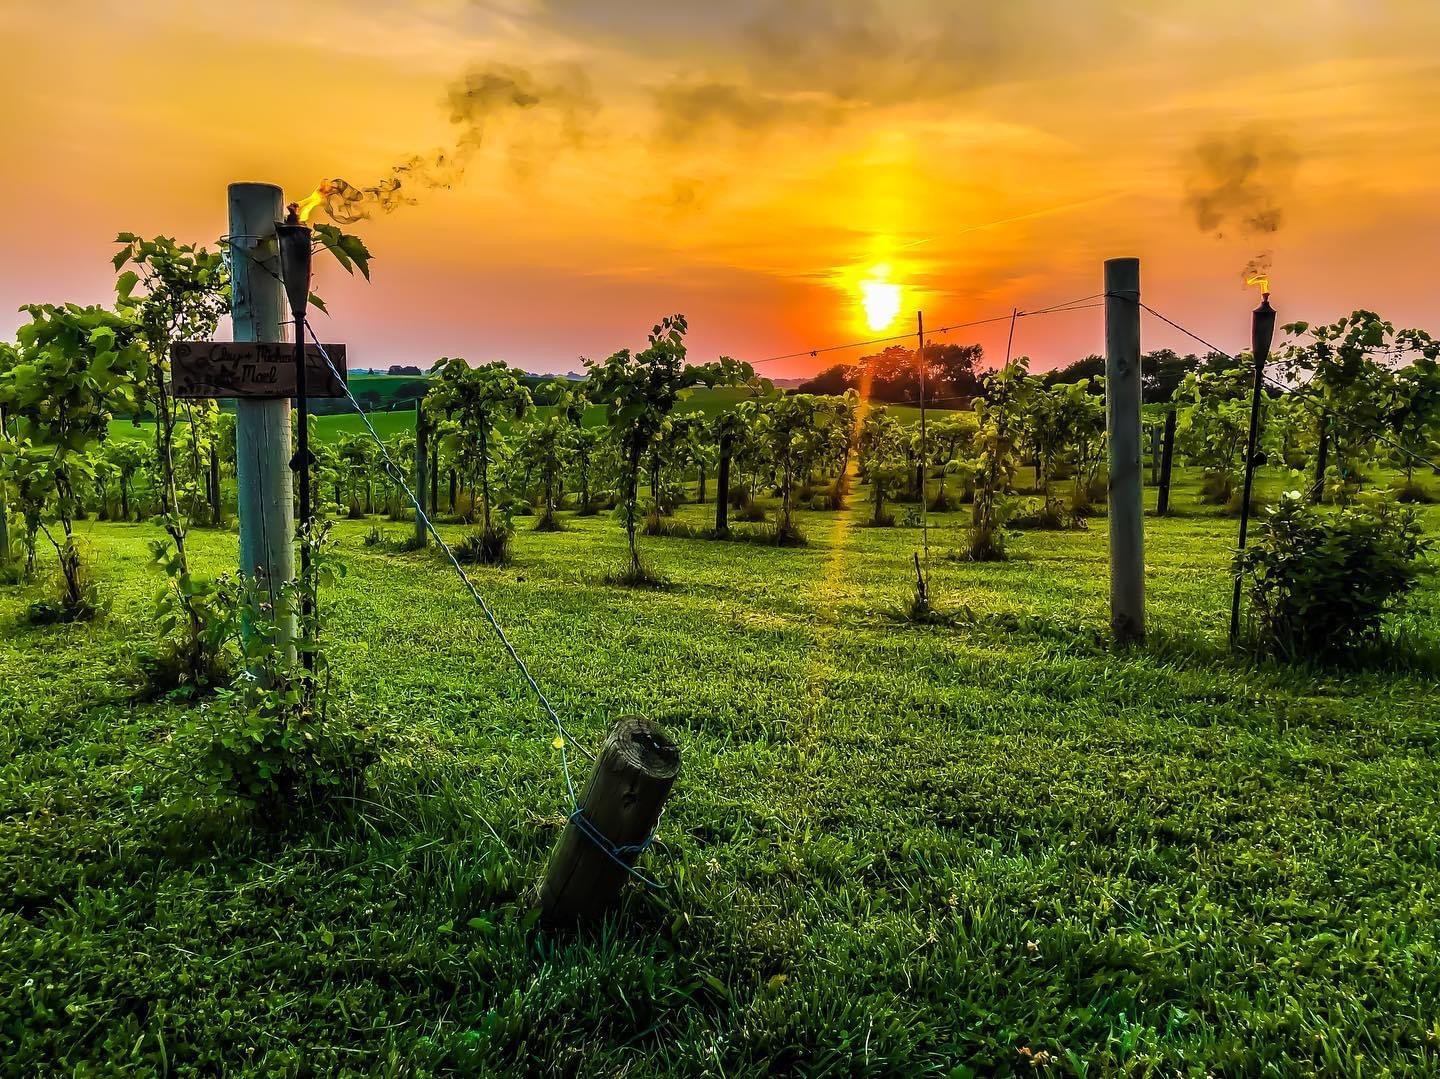 A Sunset with Torches in Vineyard (1).JPG